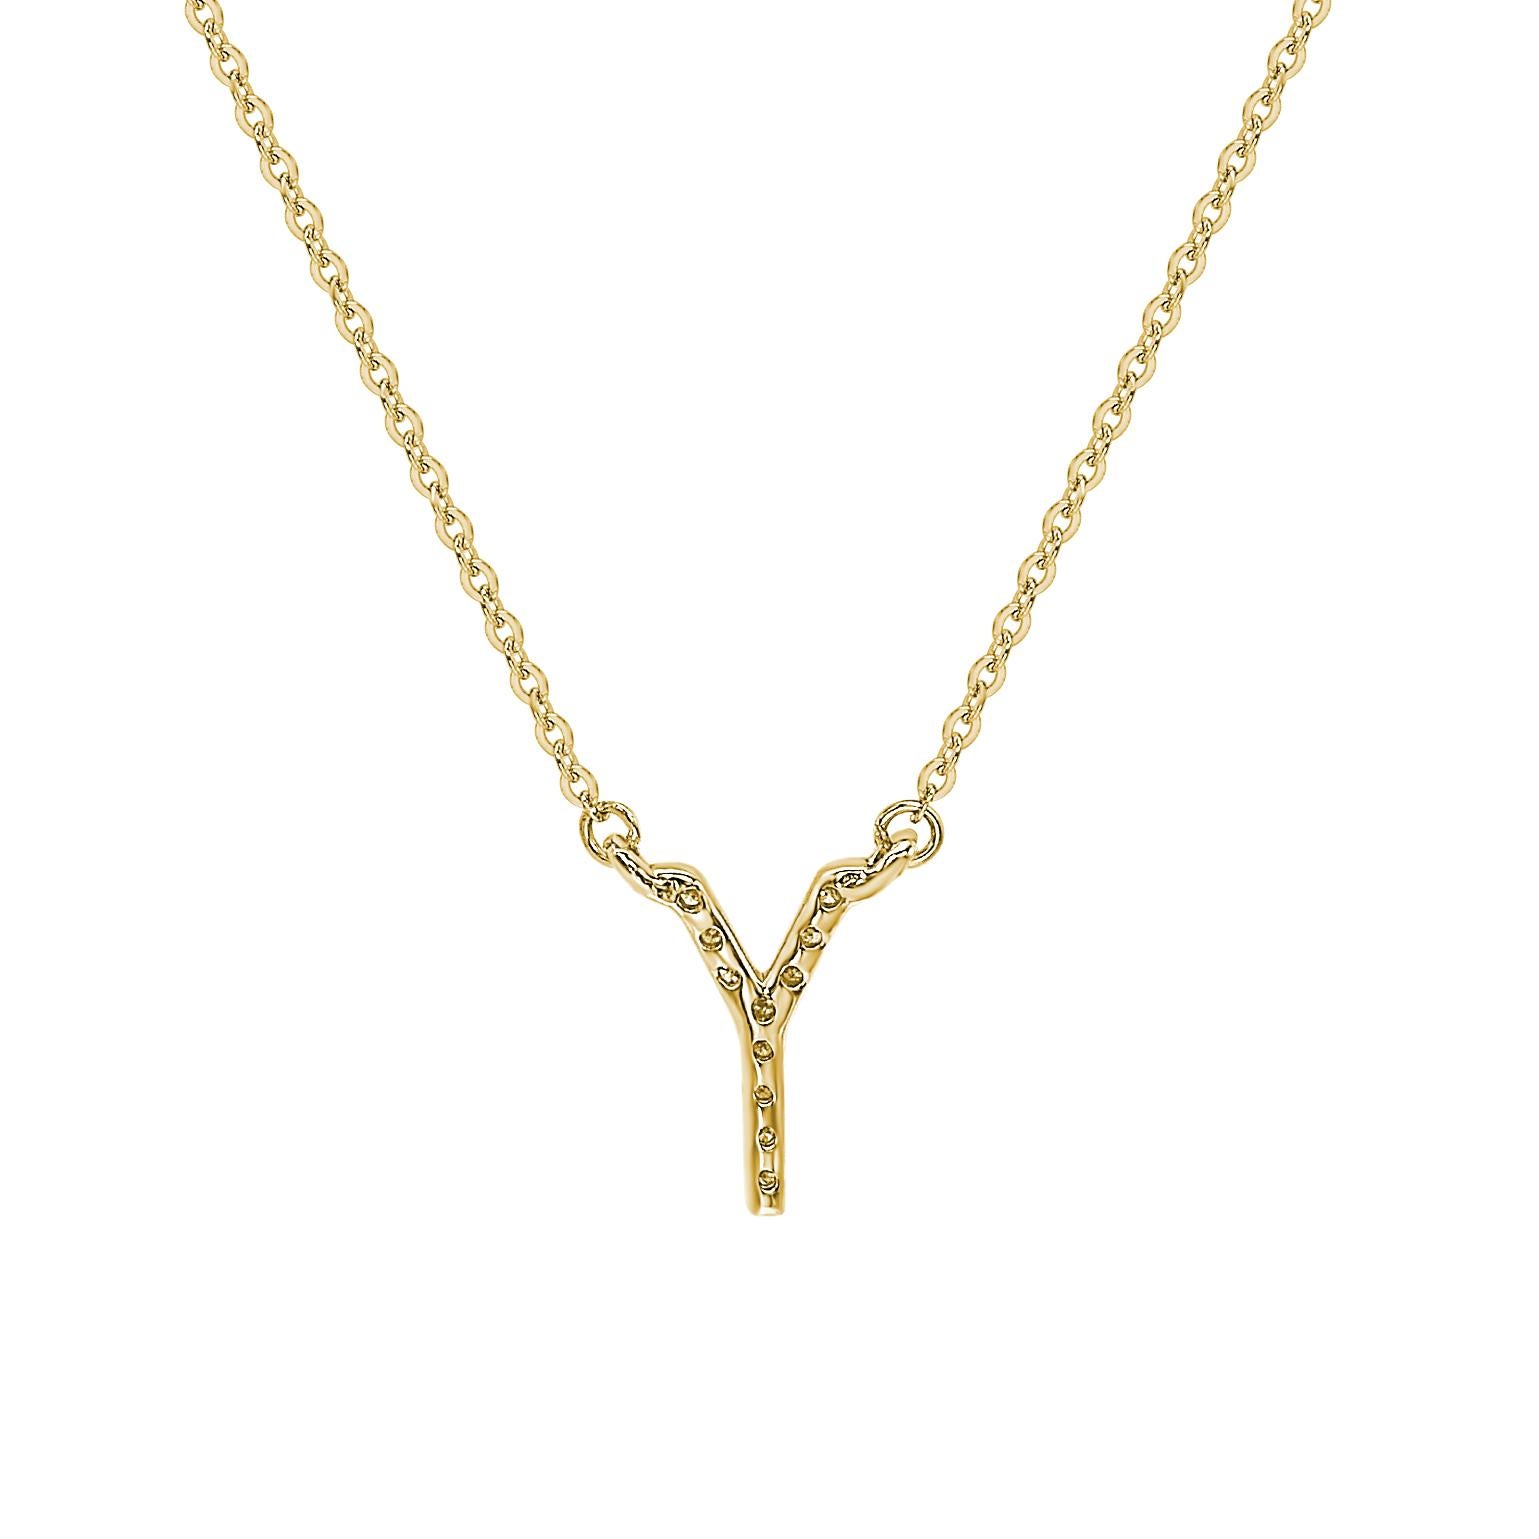 This breathtaking personalized Suzy Levian letter necklace features natural diamonds, hand-set in 14-Karat yellow gold. It's the perfect individualized gift to let someone special know you're thinking of them. Each letter necklace features a row of